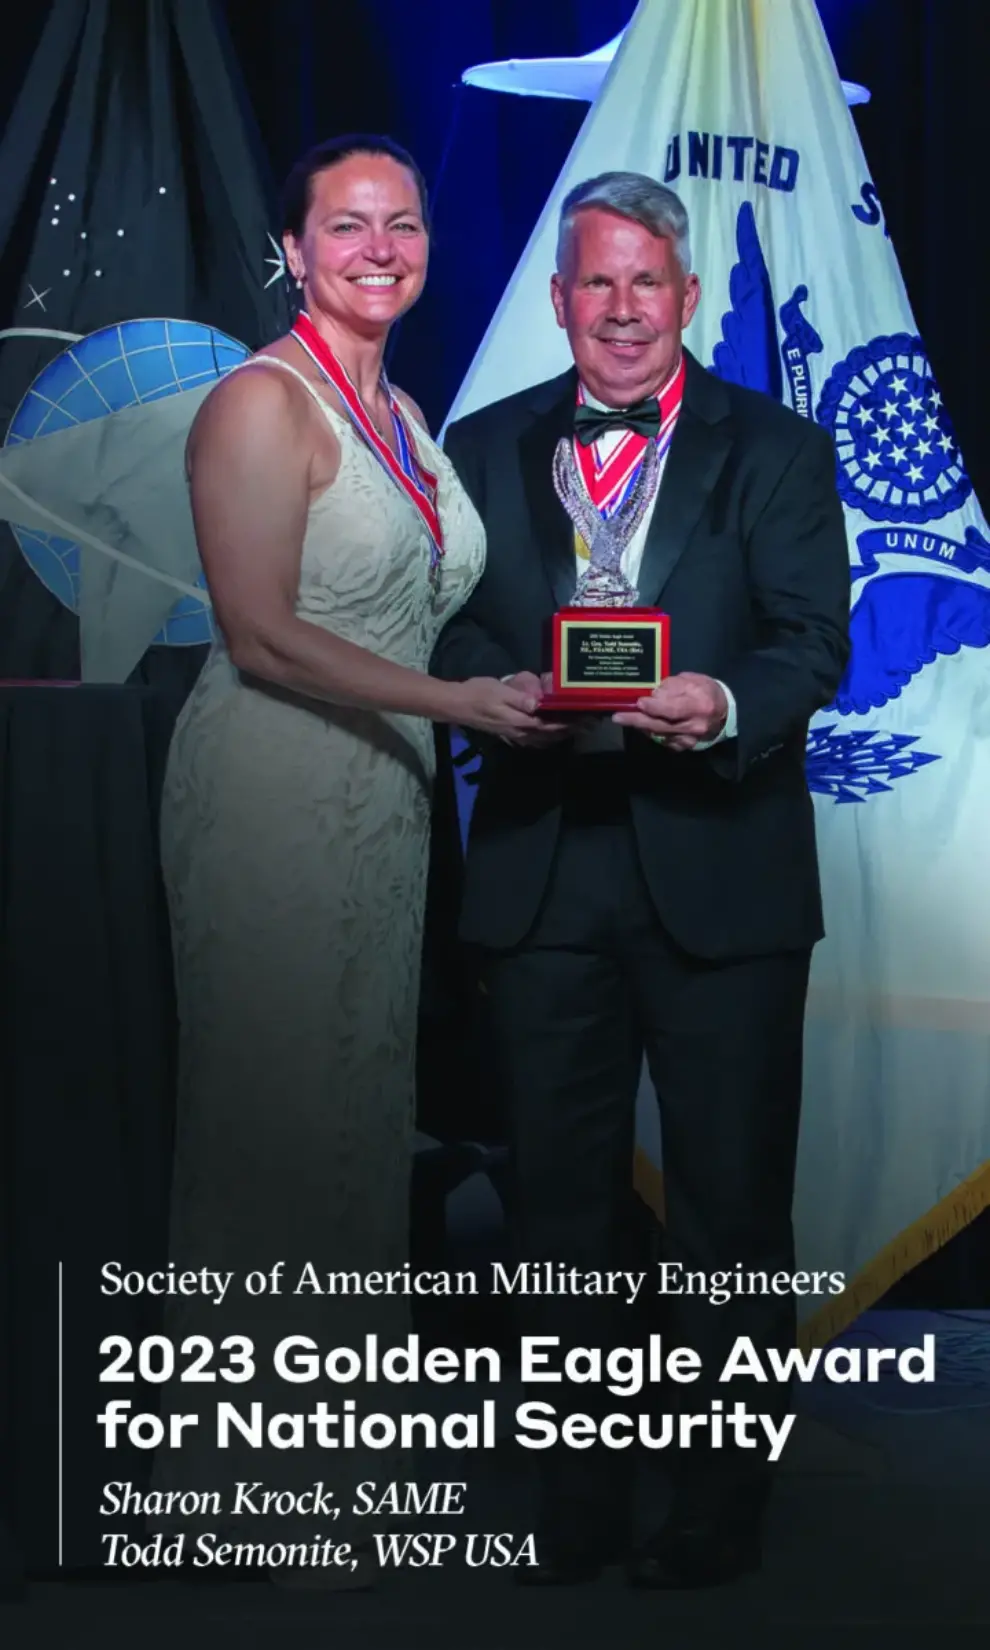 <strong>WSP USA’s Todd Semonite Honored for National Security Leadership</strong>